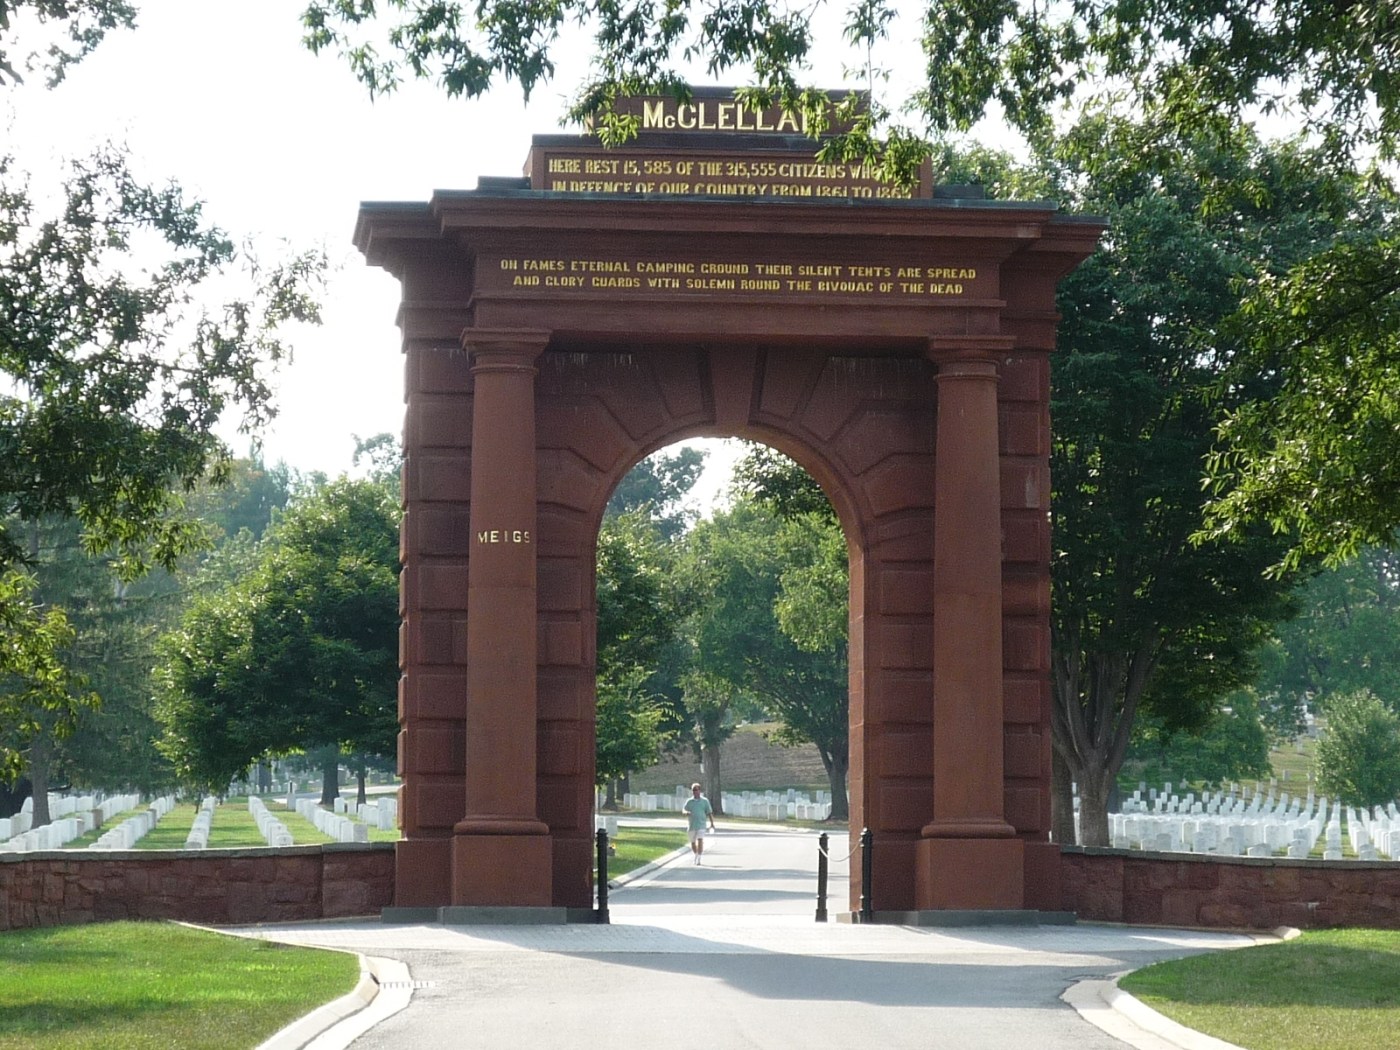 East-facing side of the McClellan Archway at the original entrance to Arlington National Cemetery, with lines from the poem displayed in gold on the pediment. The pediment on the other side features a different verse. (hmdb.org)